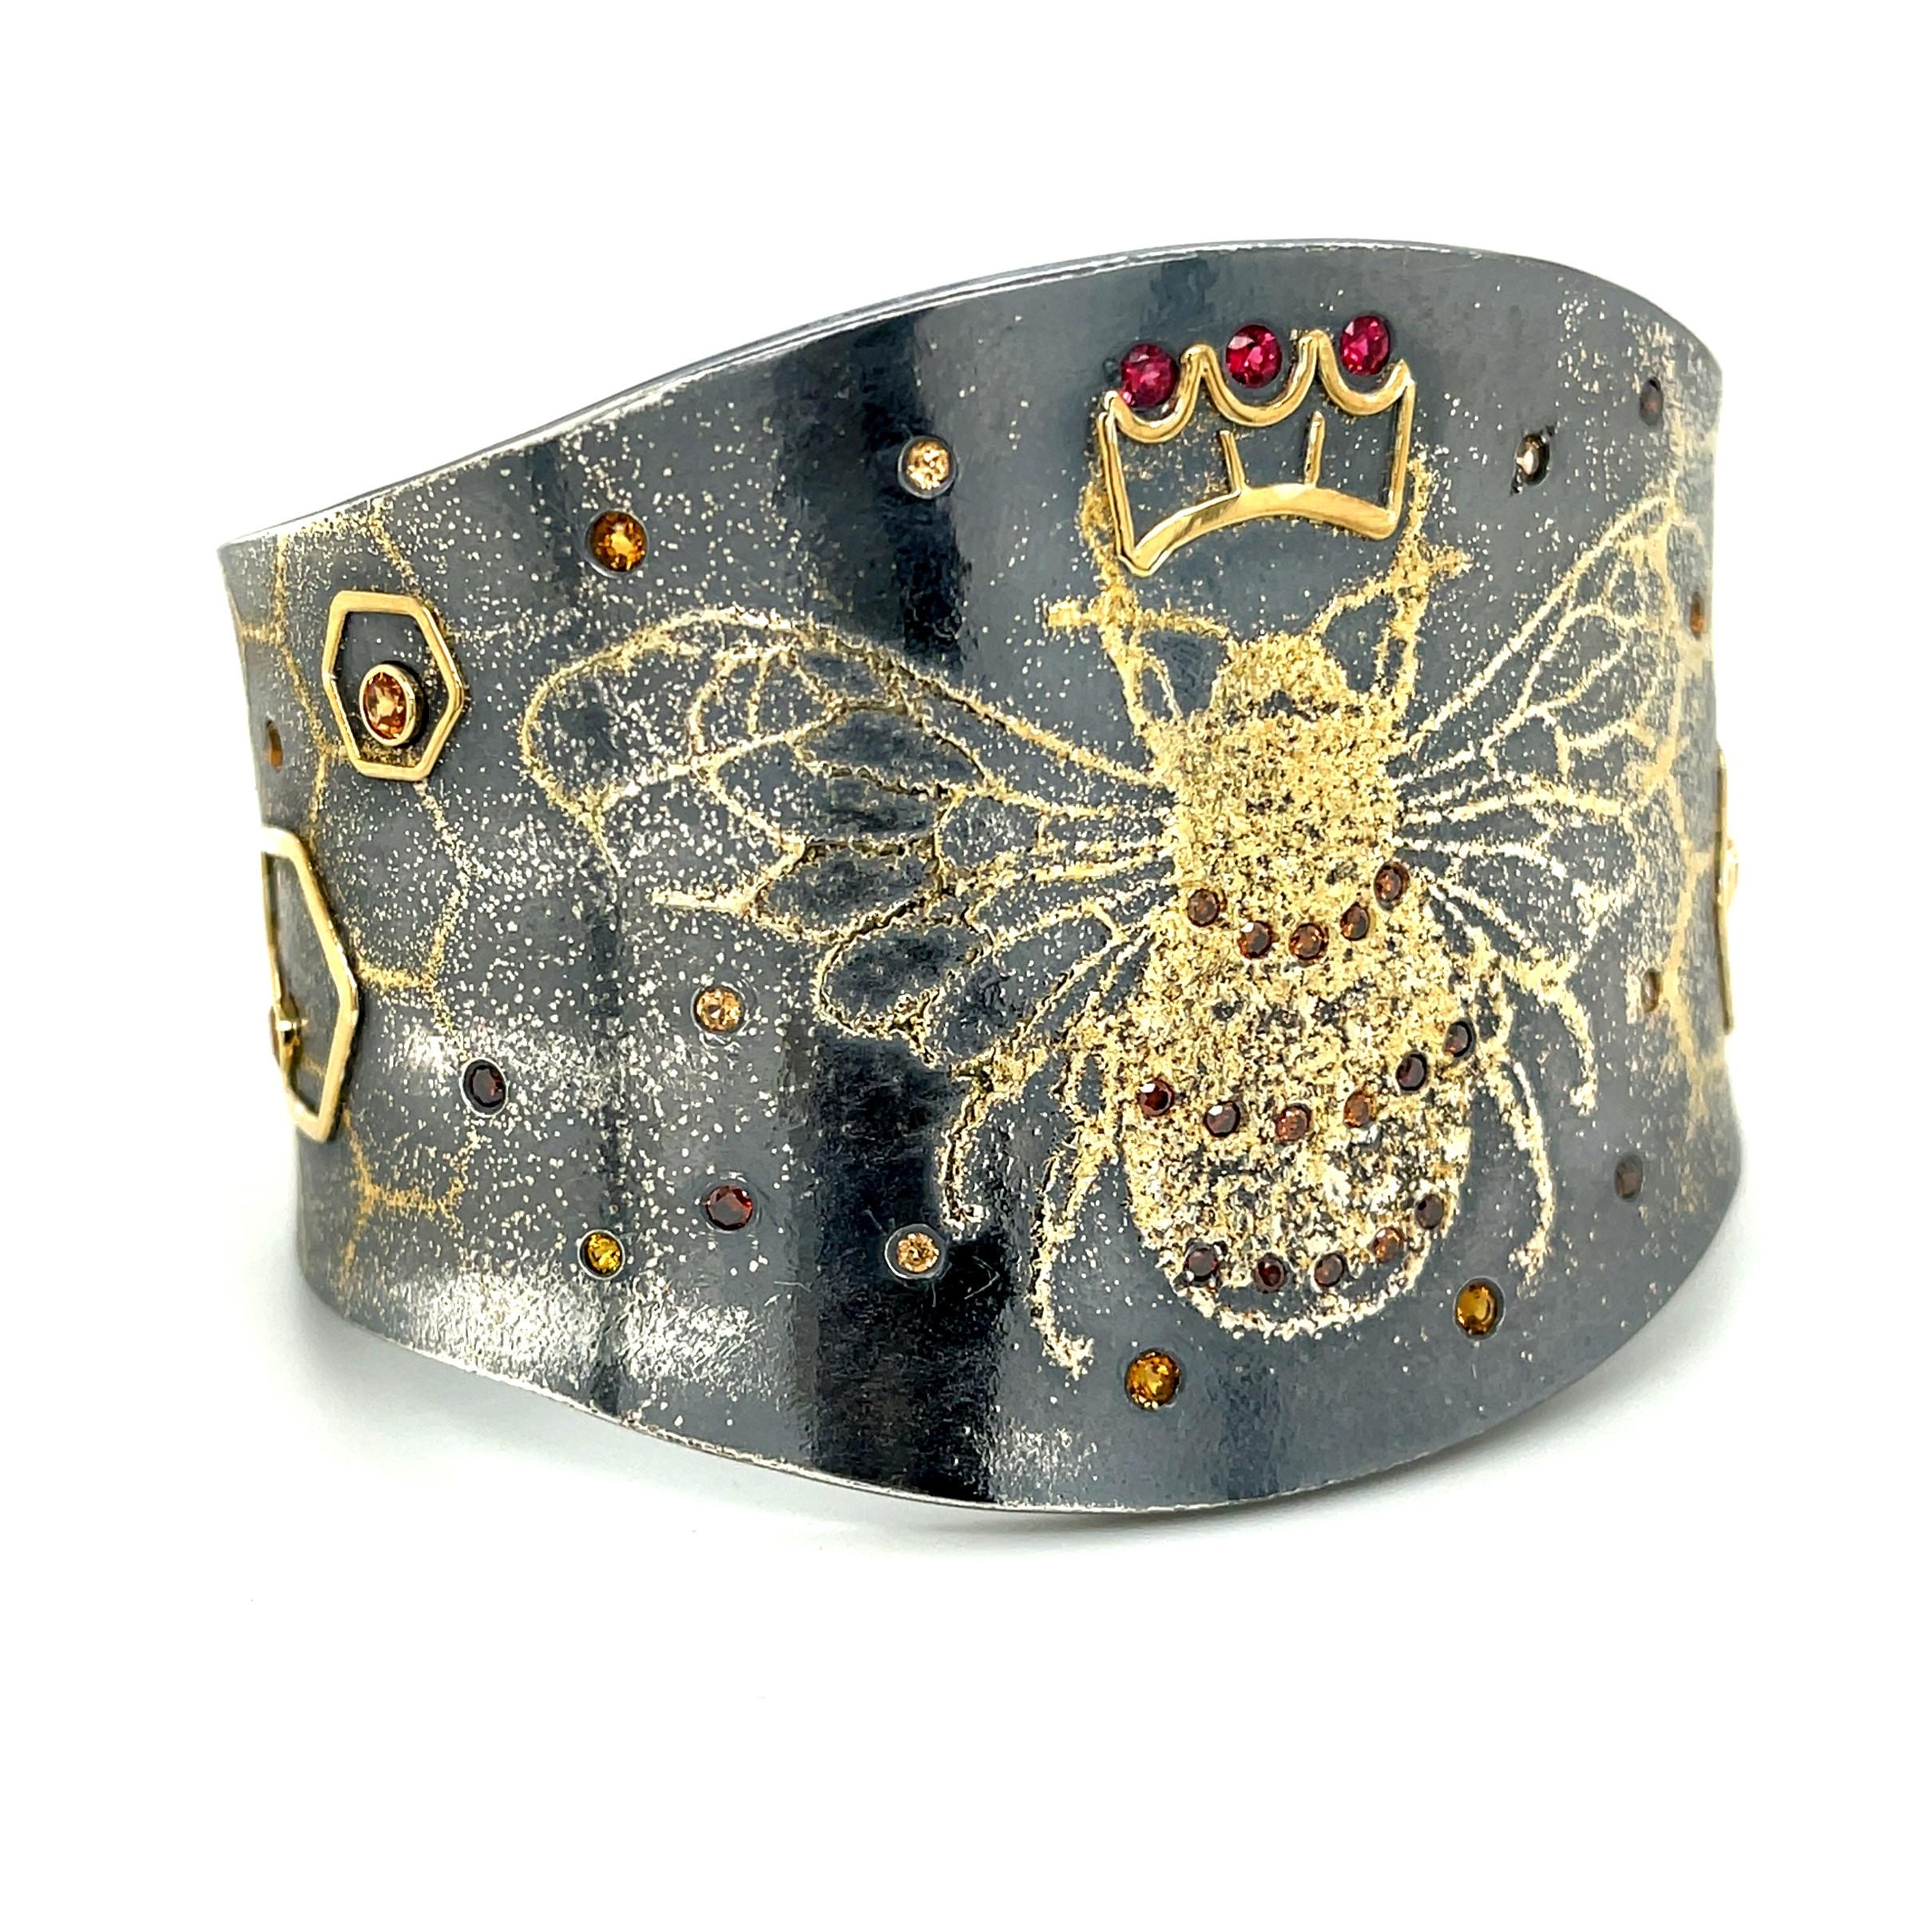 A cuff bracelet made with oxidized sterling silver, 24K, 22k and 18k yellow gold with 1.74 ct. of diamonds and colored stones.(There are .28ct. of Cognac Diamonds,.72ct. of Spessartite Garnets,.24ct. of Citrine,.20ct. of Orange Sapphires and .30ct.